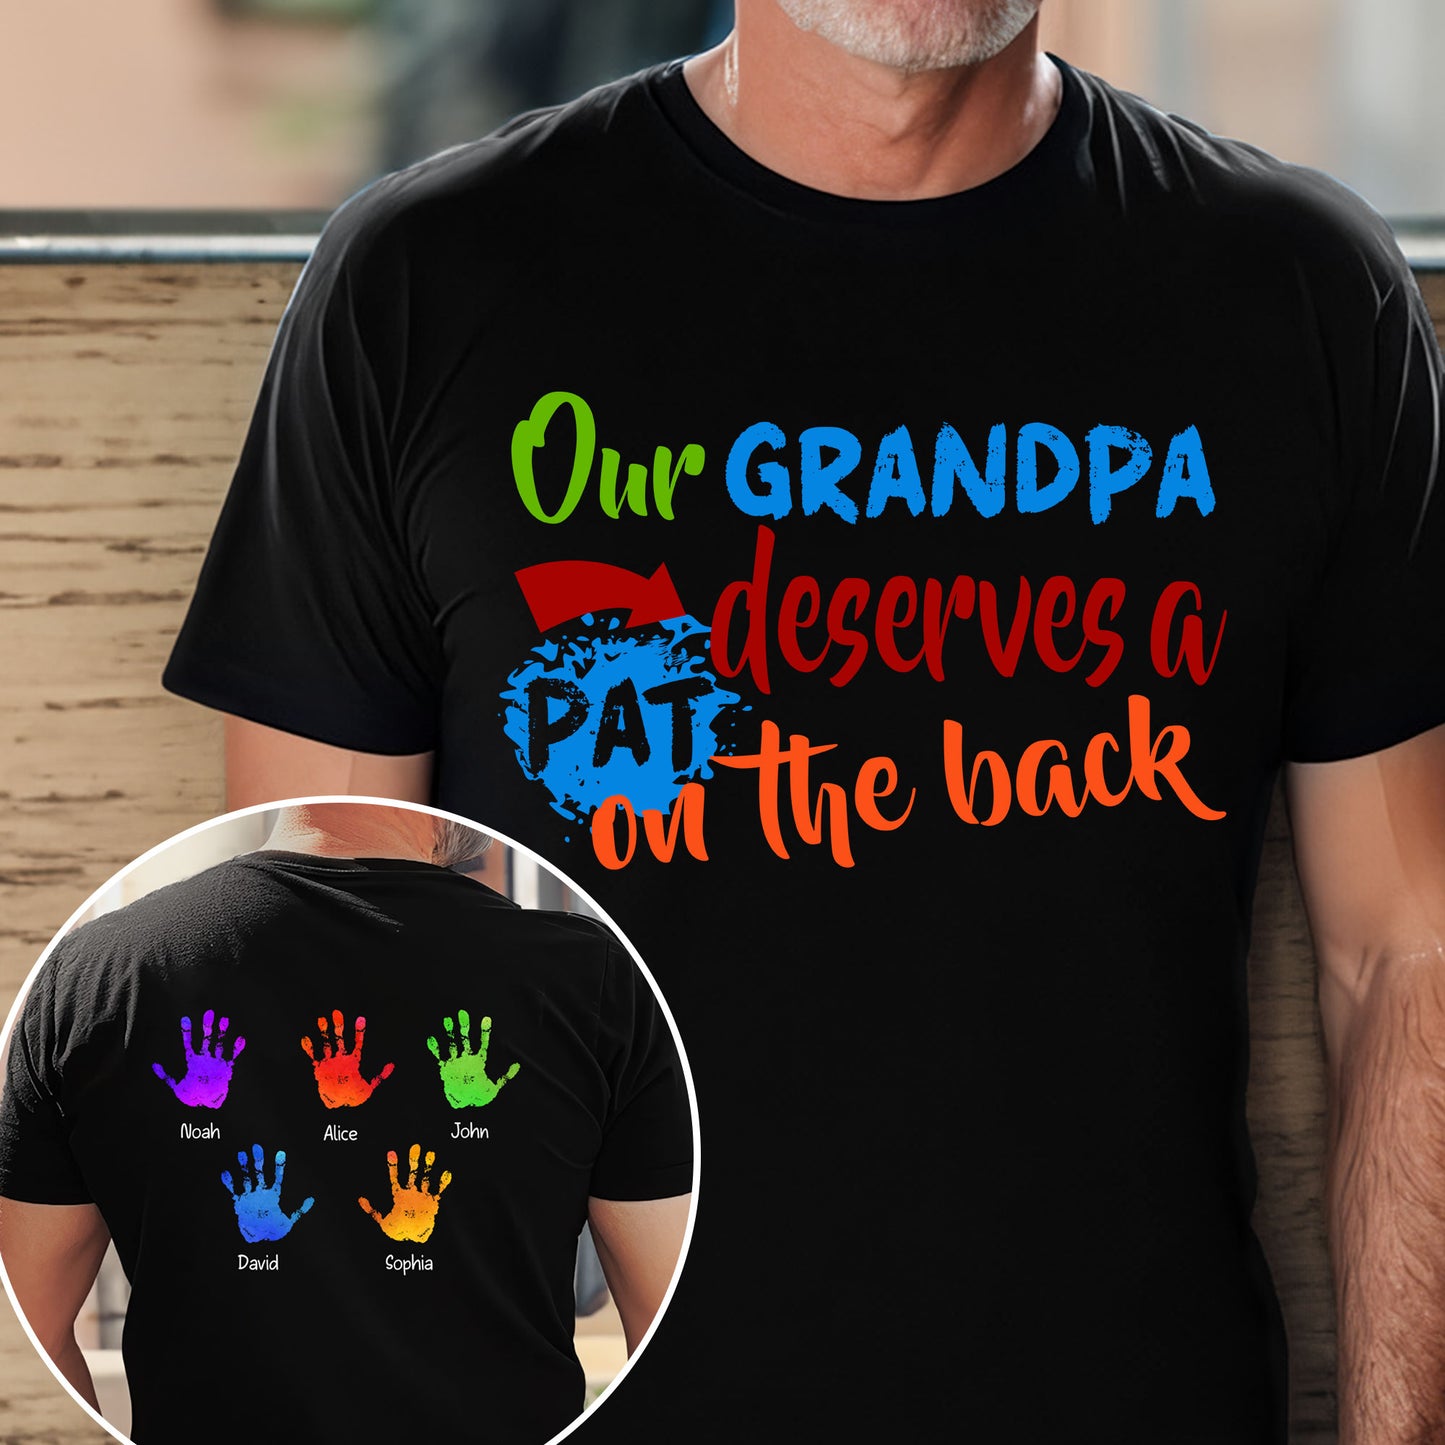 Dad/ Grandpa Deserves A Pat On The Back - Personalized Shirt